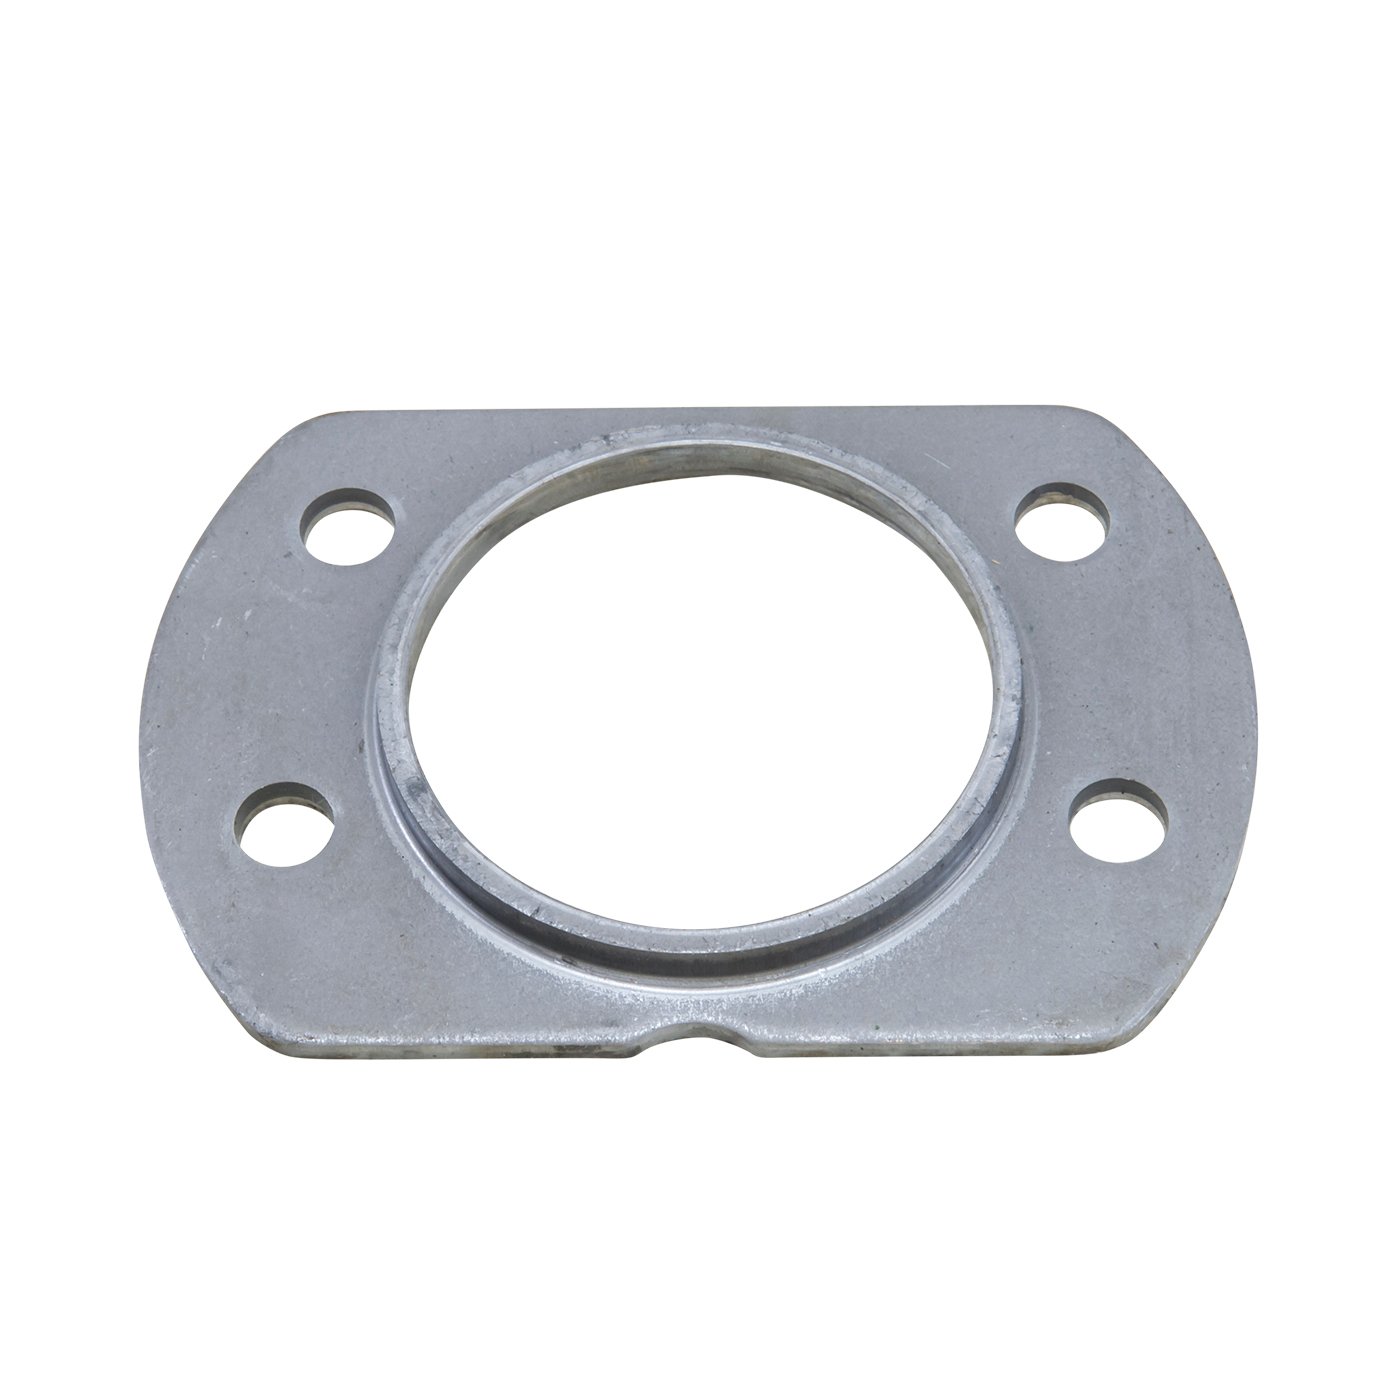 Axle Bearing Retainer For Dana 44 Rear In Jeep TJ